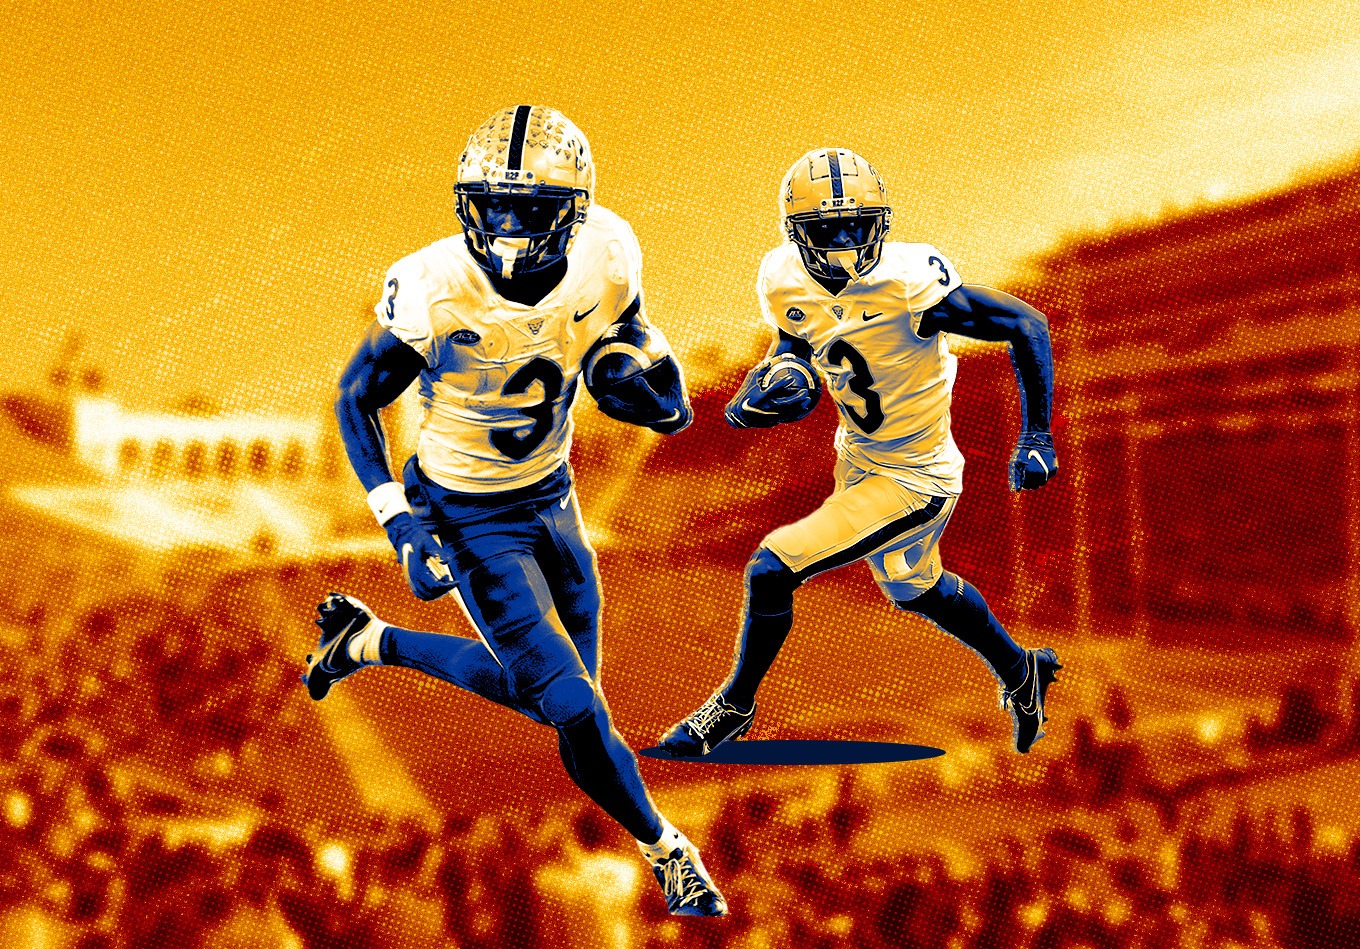 2023 NFL Draft: How New USC Wide Receiver Jordan Addison Compares to the 2022 Draft Class